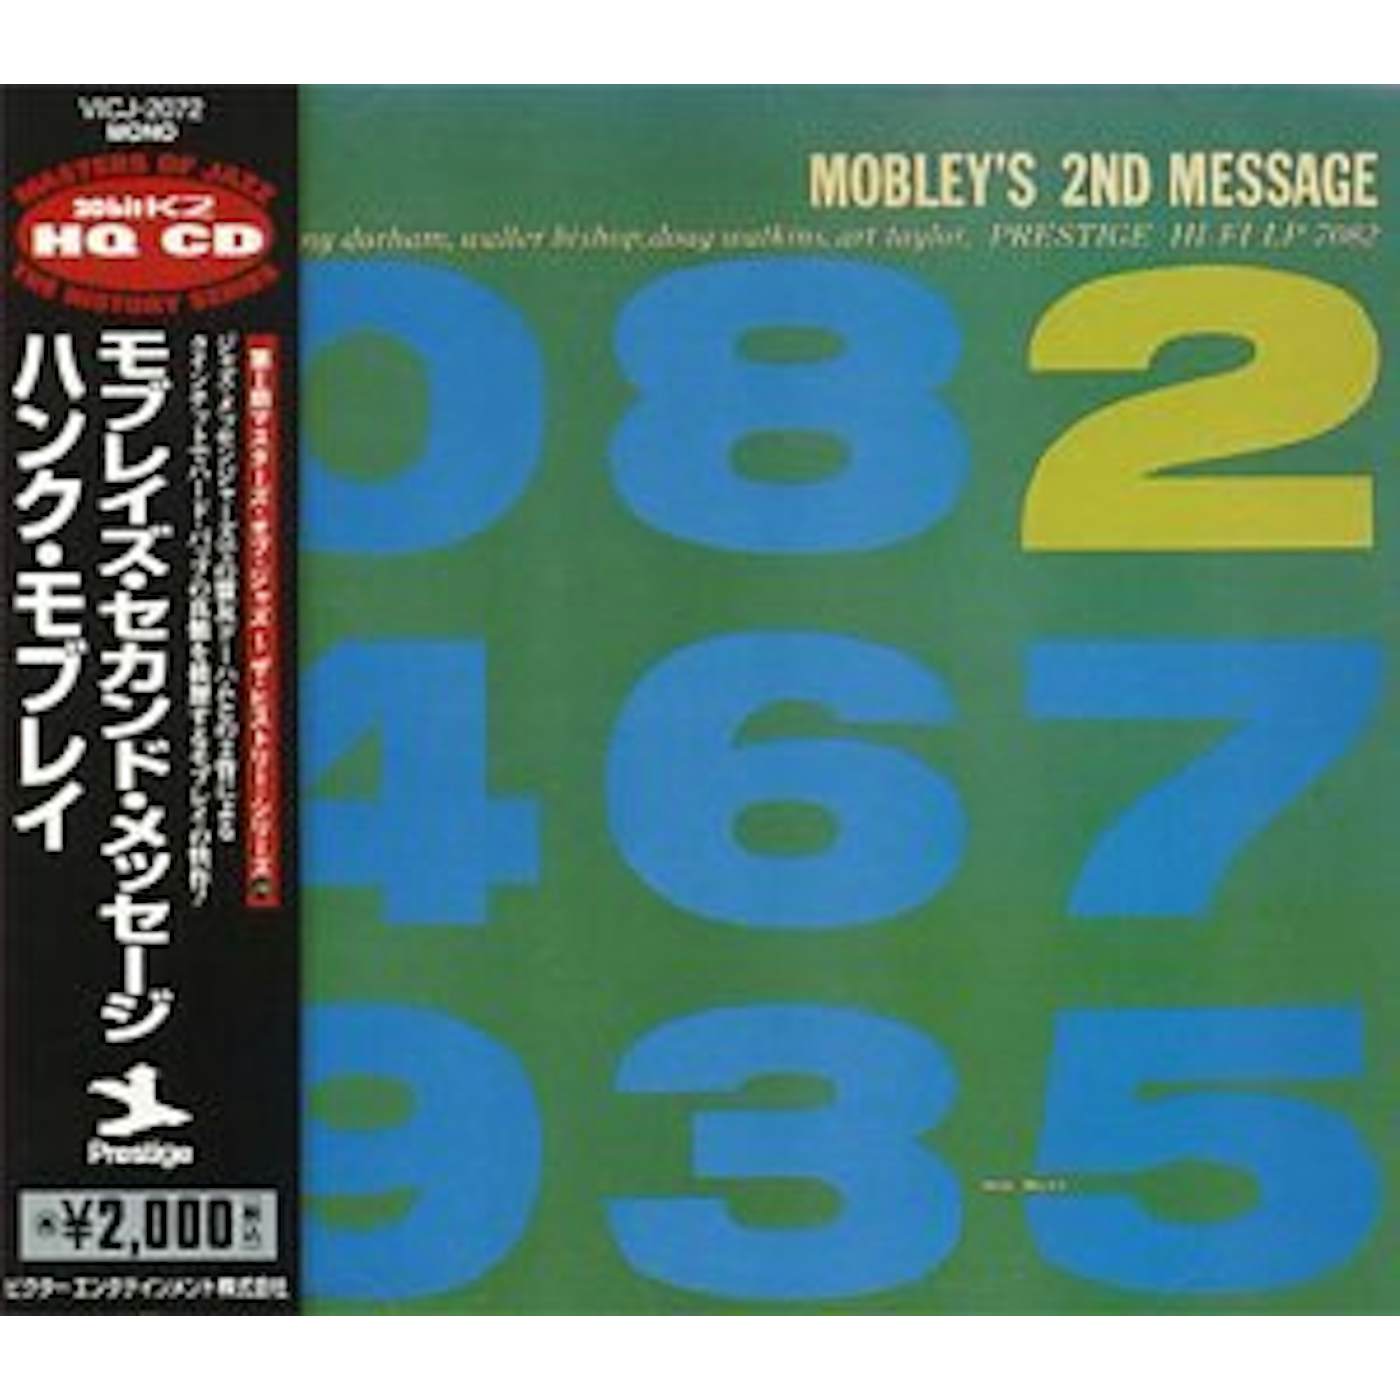 Hank Mobley MOBLEY'S SECOND MESSAGE CD